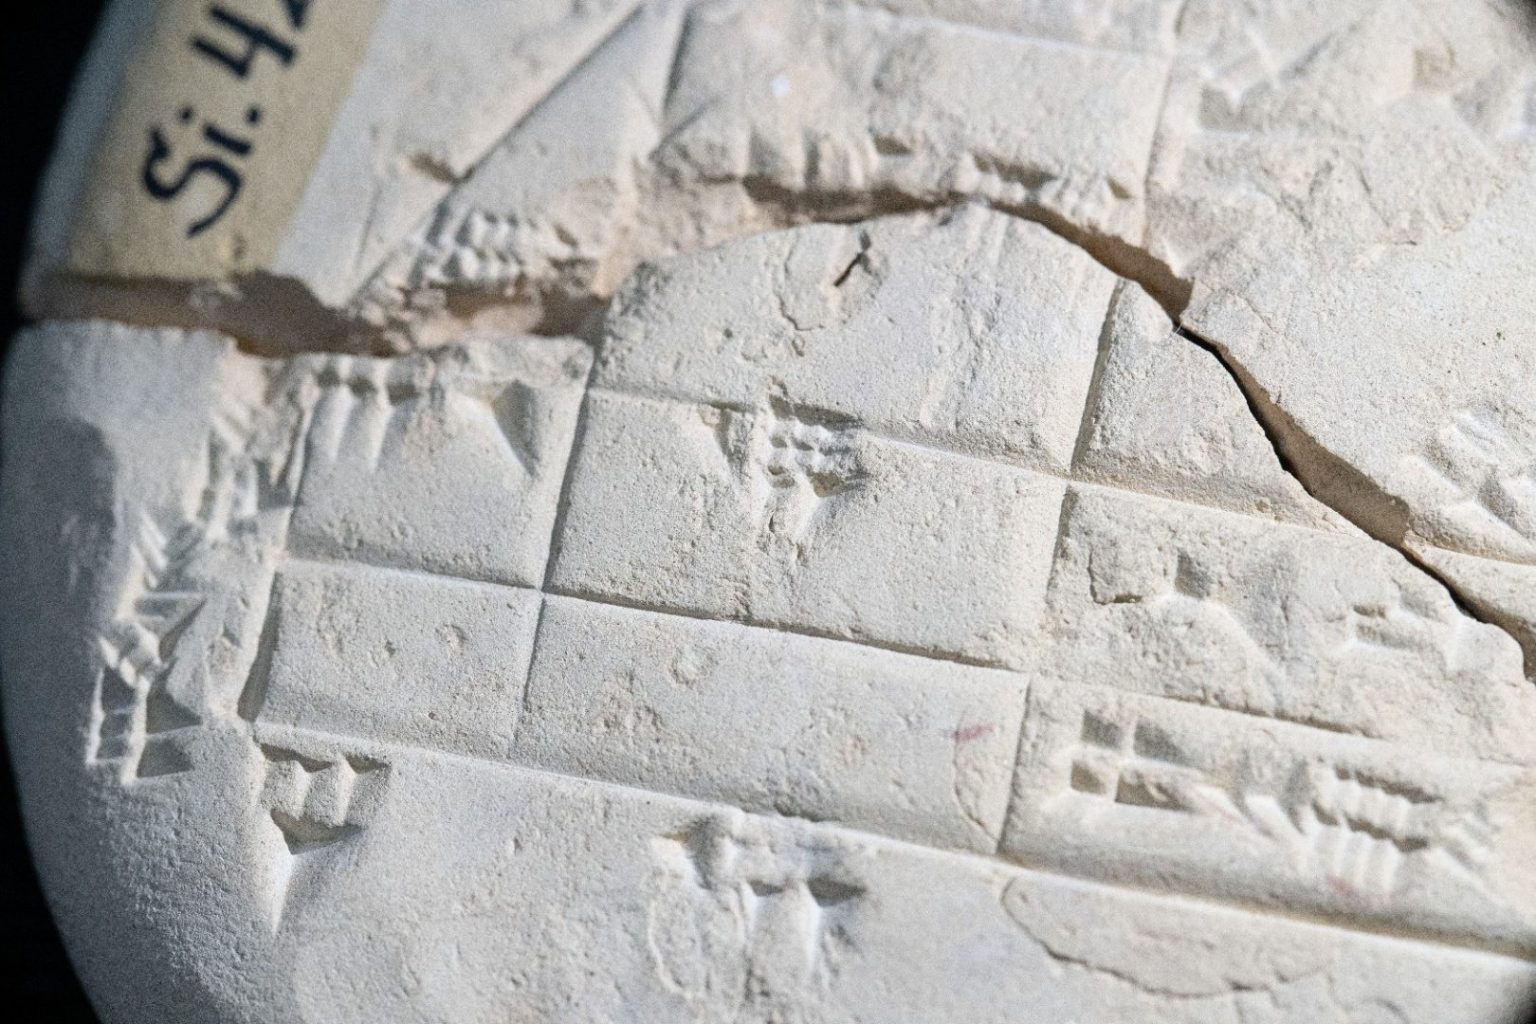 Close-up shot of the tablet revealing the oldest example of applied geometry. Credit: UNSW